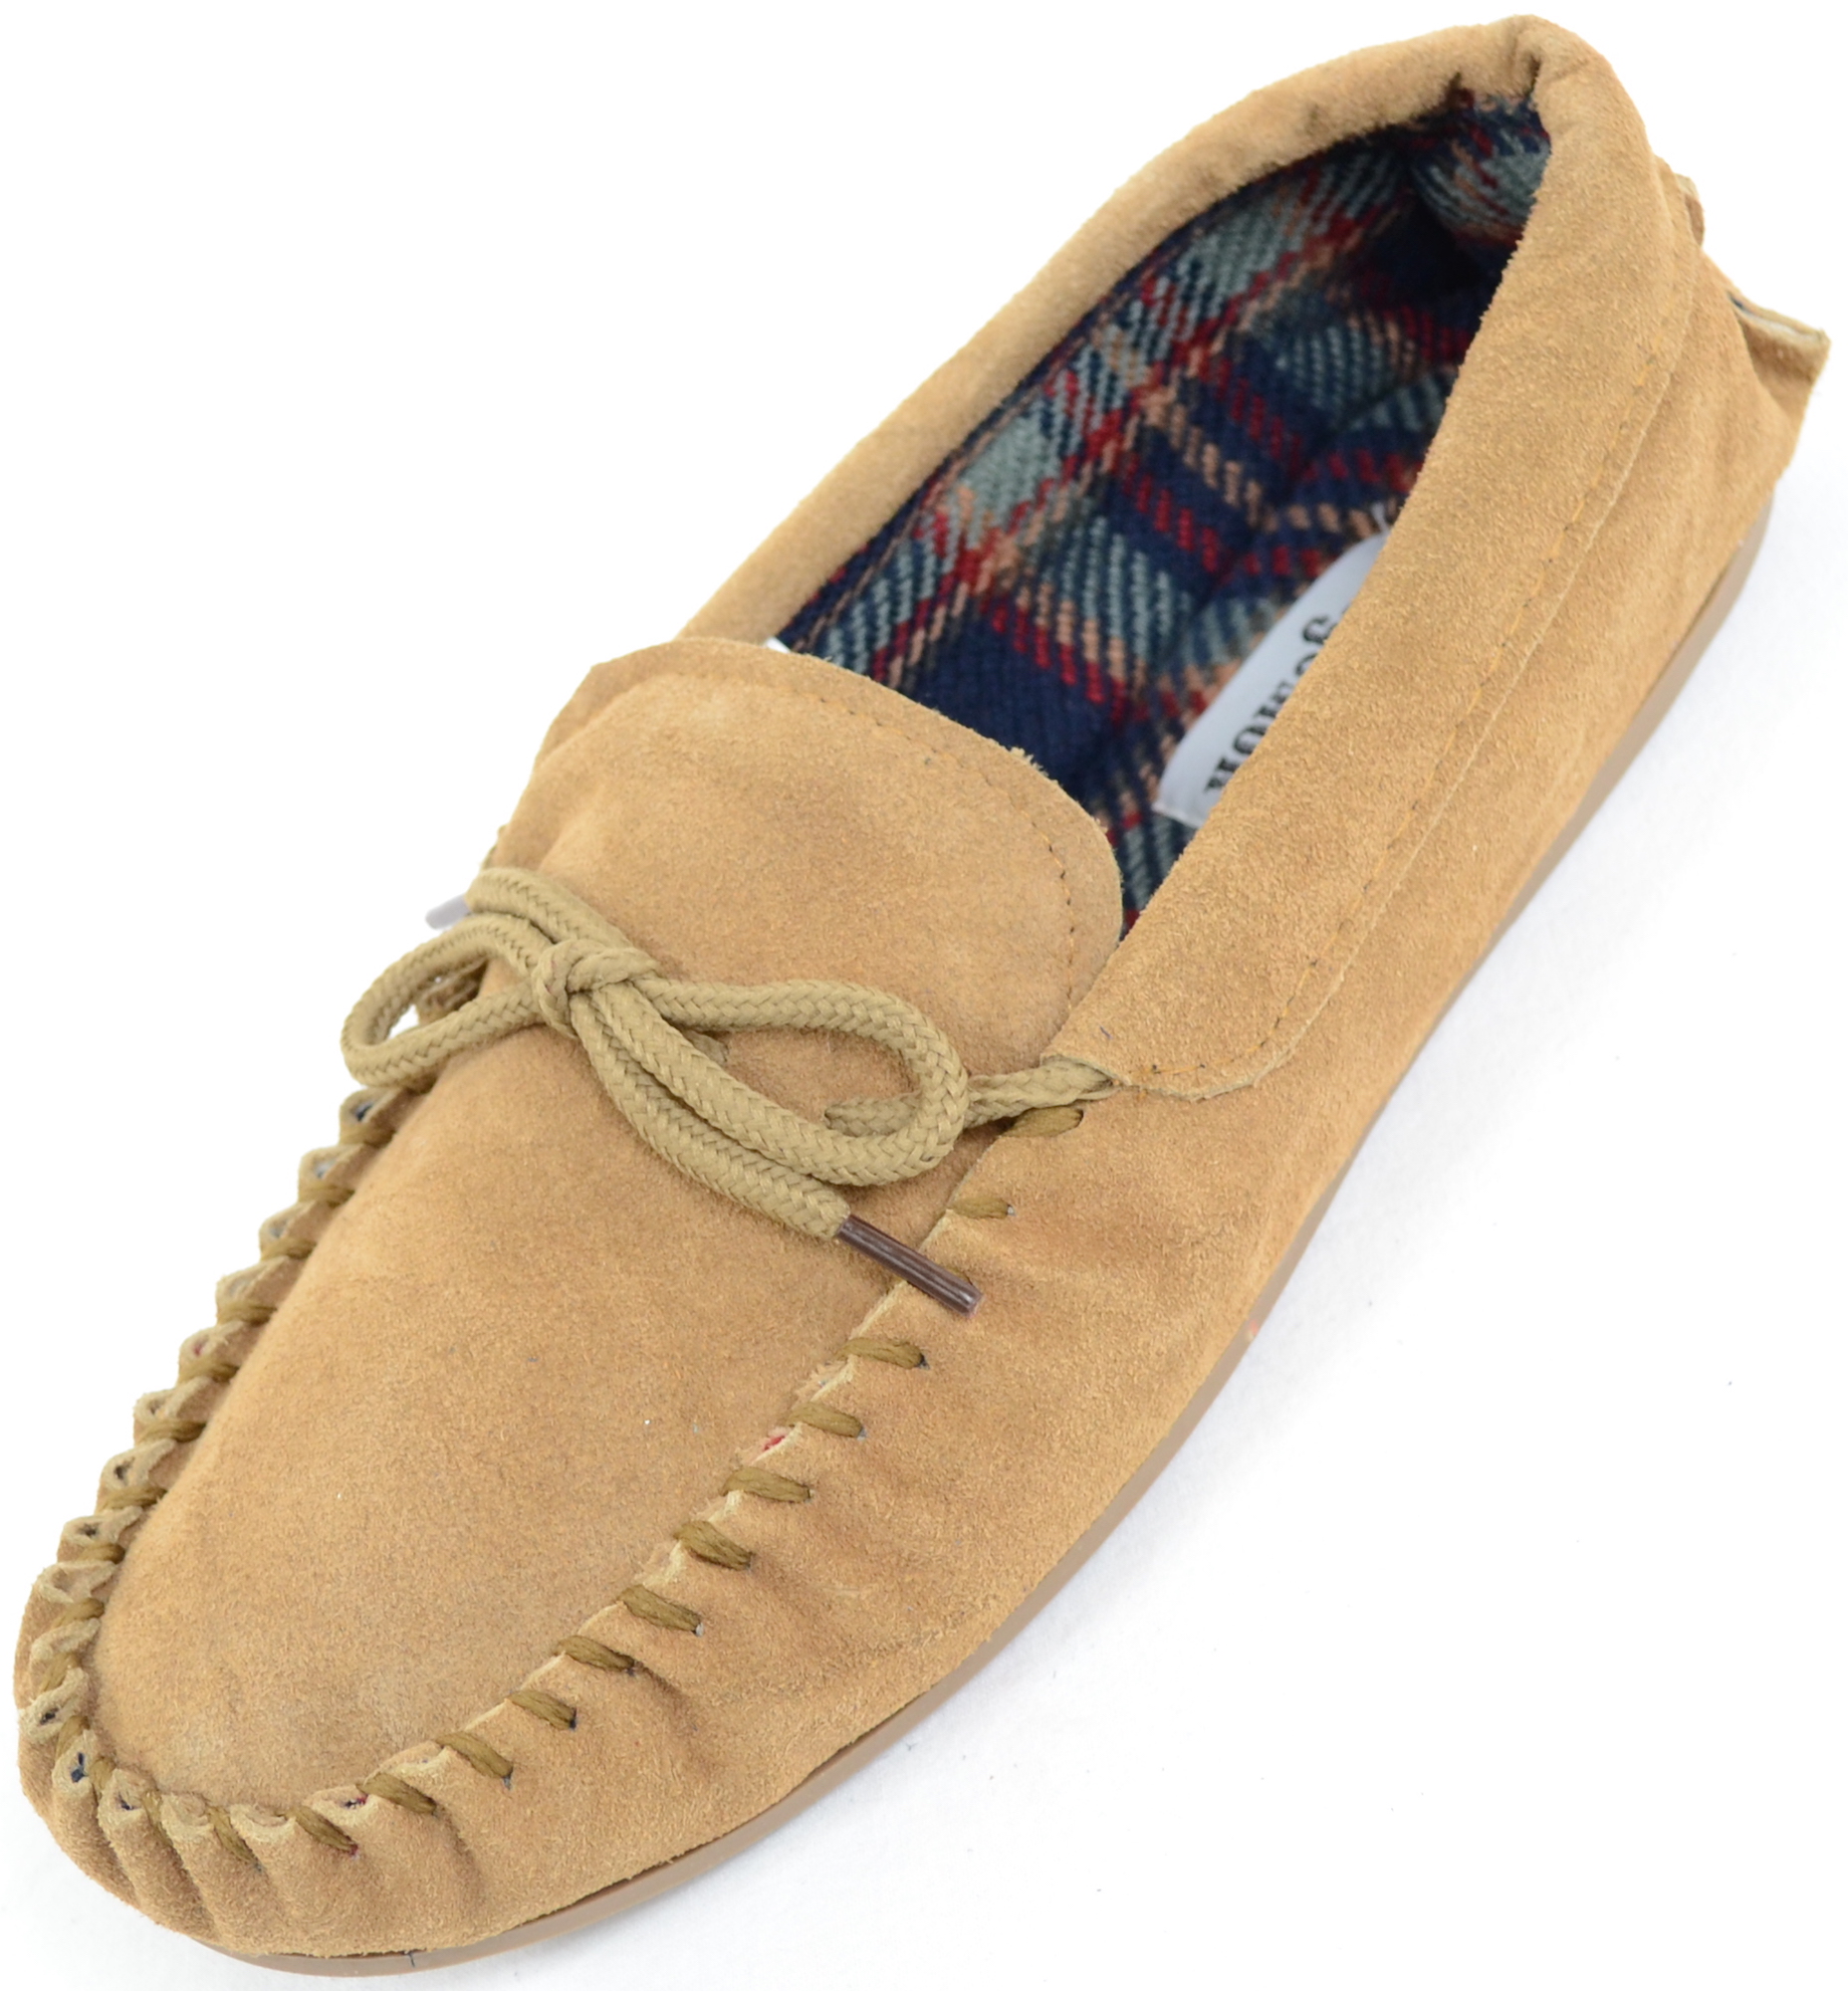 moccasin leather